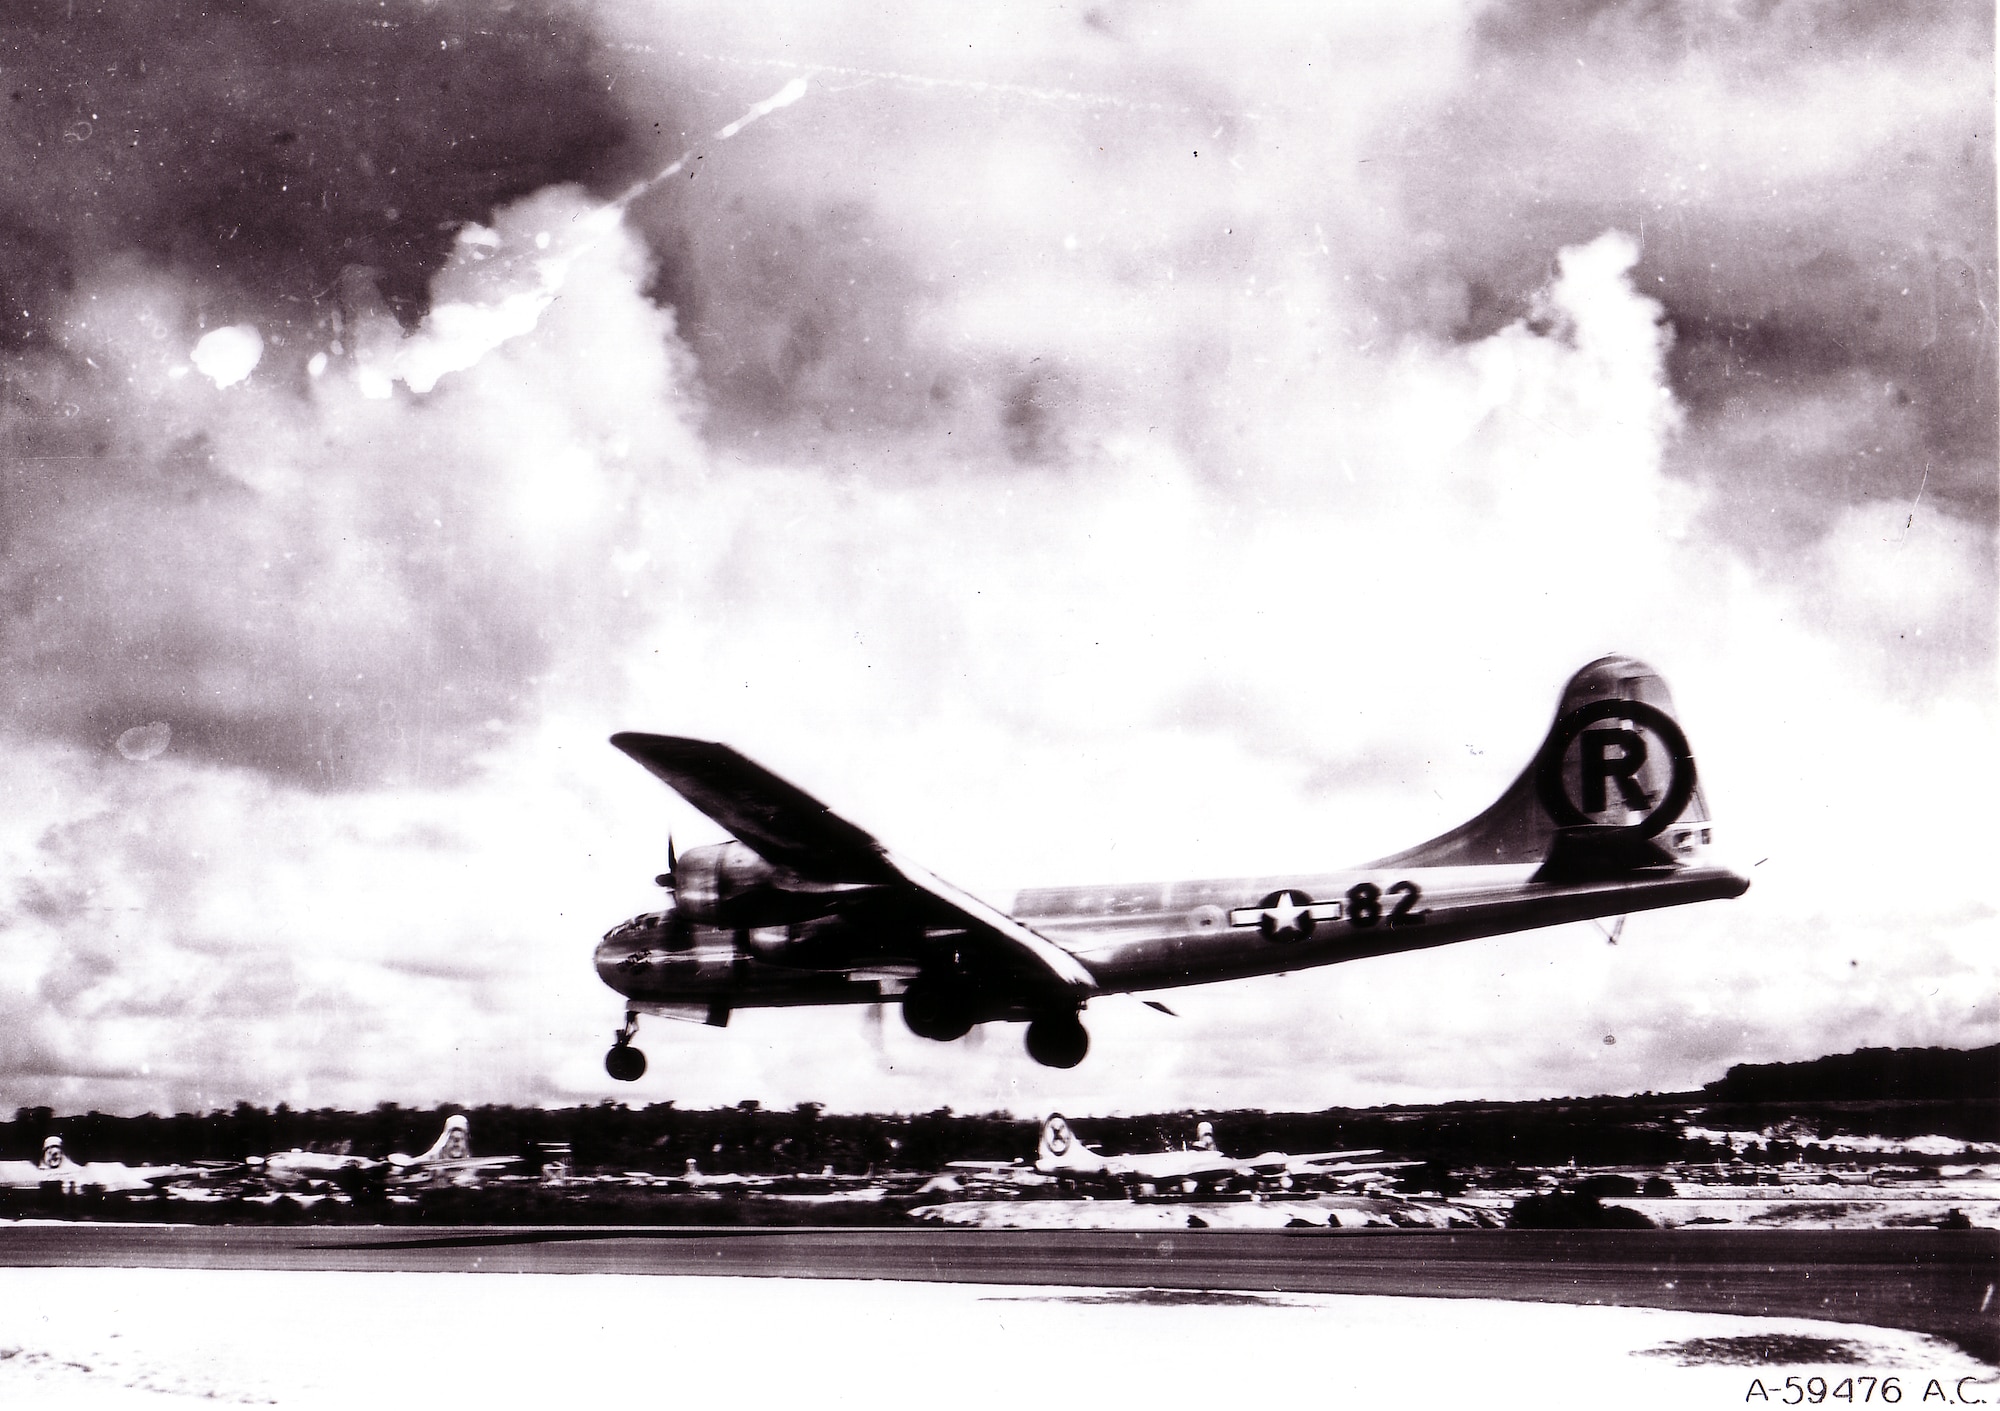 1940's -- MARIANAS ISLAND -- Boeing B-29 Superfortress "Enola Gay" landing after the atomic bombing mission on Hiroshima, Japan. (U.S. Air Force photo)